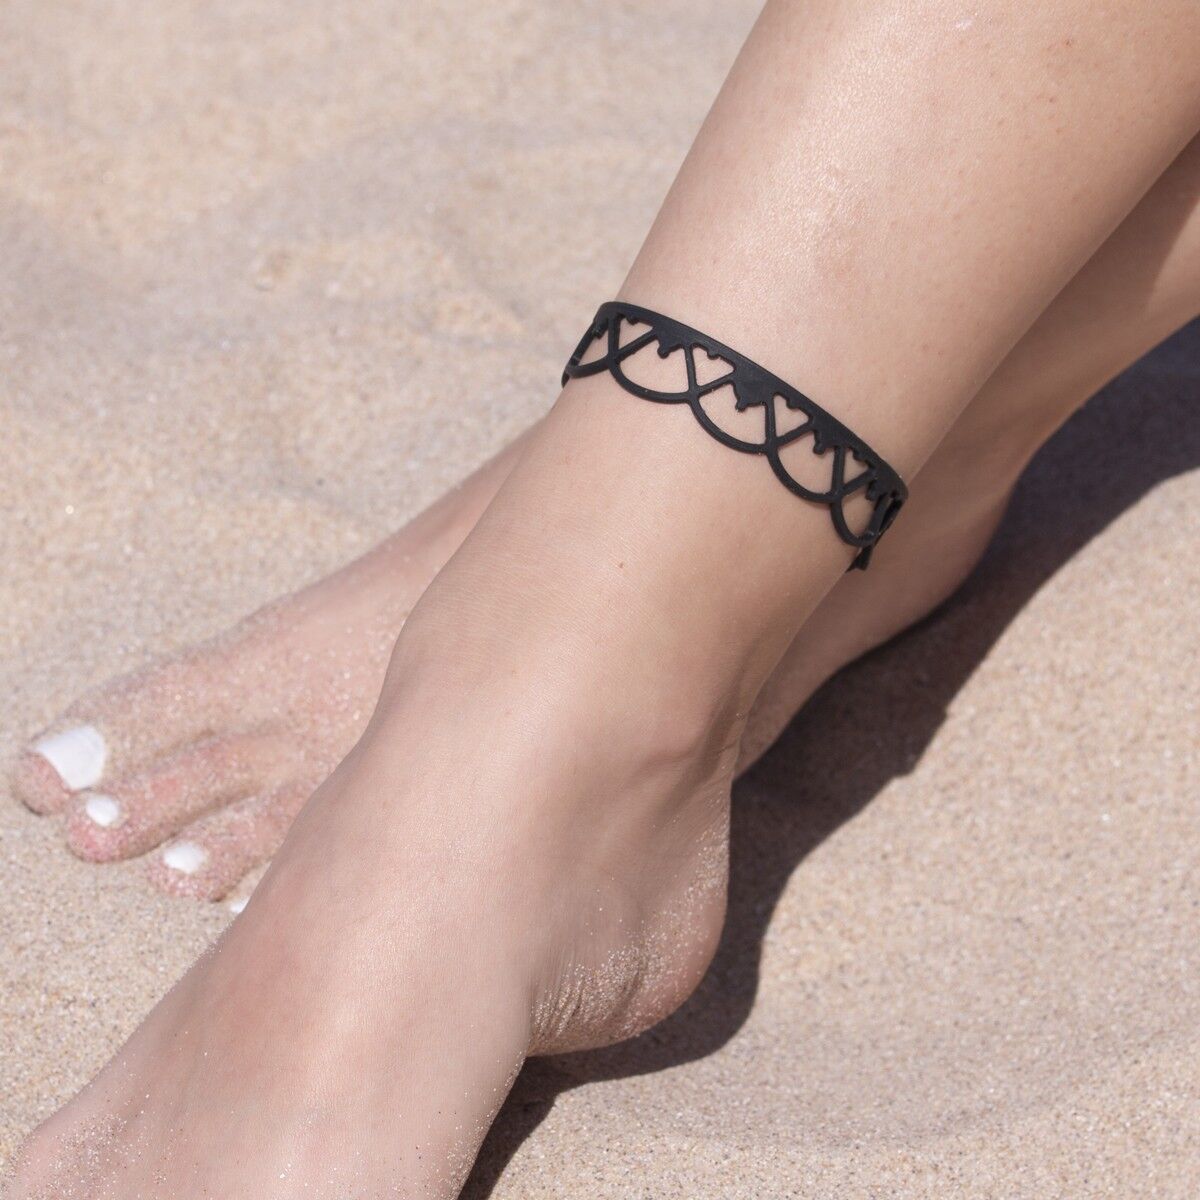 Vintage Gothic Cuban Chain Armband Tattoo Choker Anklet Stretchable Elastic  Bracelet For Boho Style 80s/90s Trum22 From Trumanessa, $8.22 | DHgate.Com